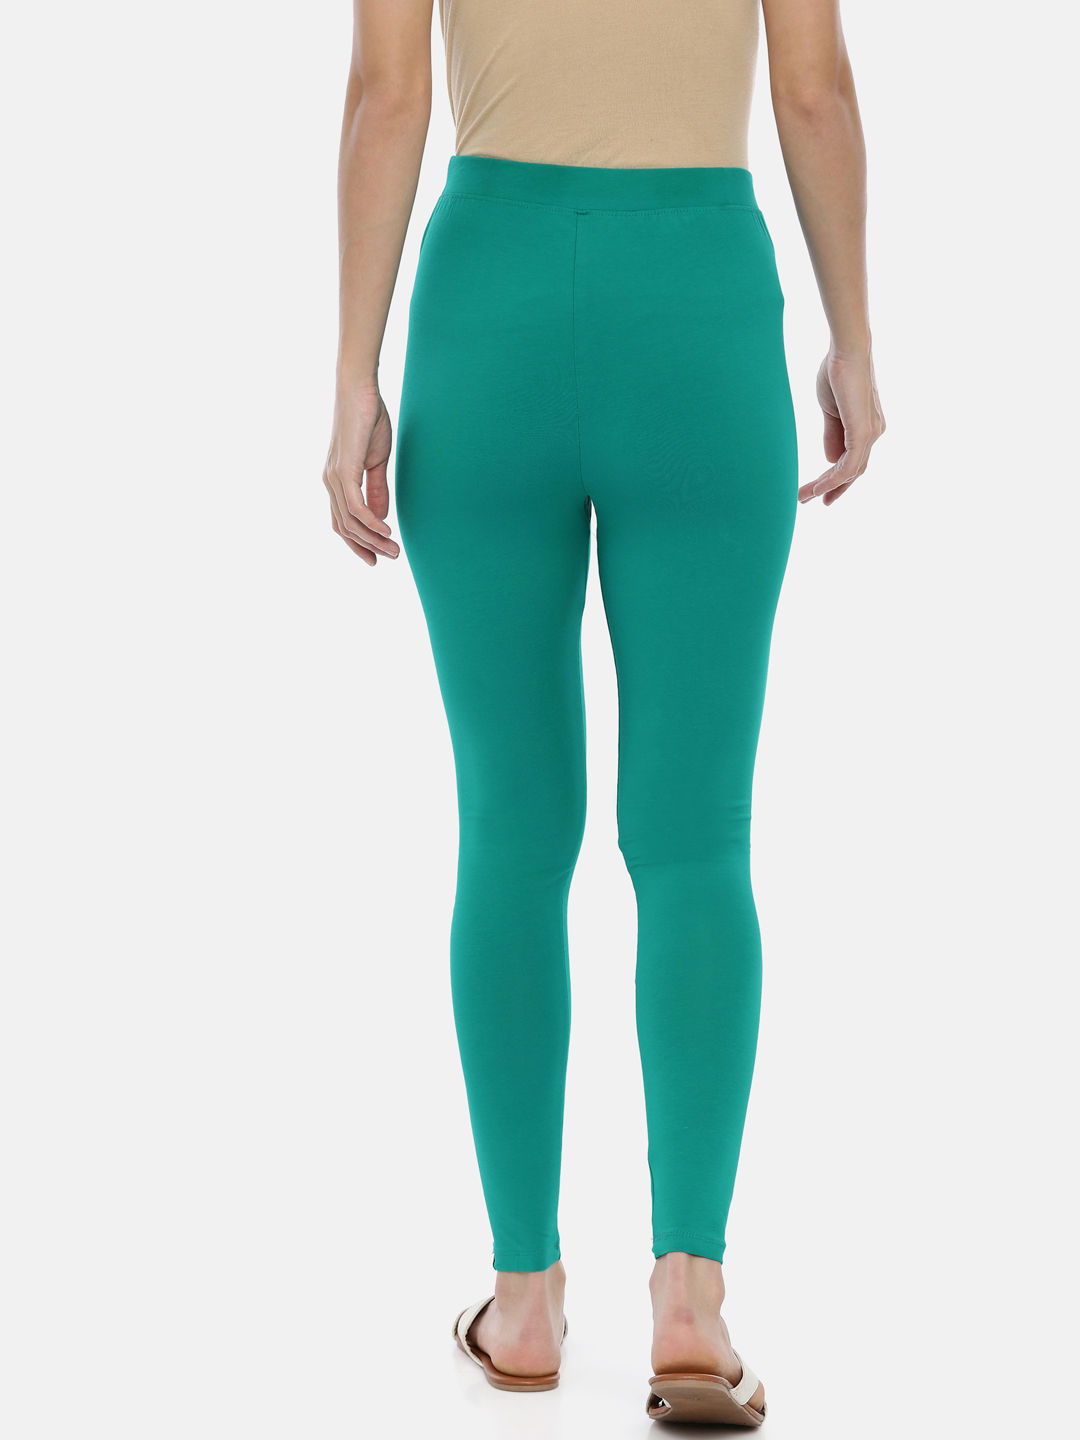 Cotton Light Pink,Biege and Rama Green Color Leggings Combo @ 31% OFF Rs  617.00 Only FREE Shipping + Extra Discount - Stylish legging, Buy Stylish  legging Online, simple legging, Combo Deal, Buy